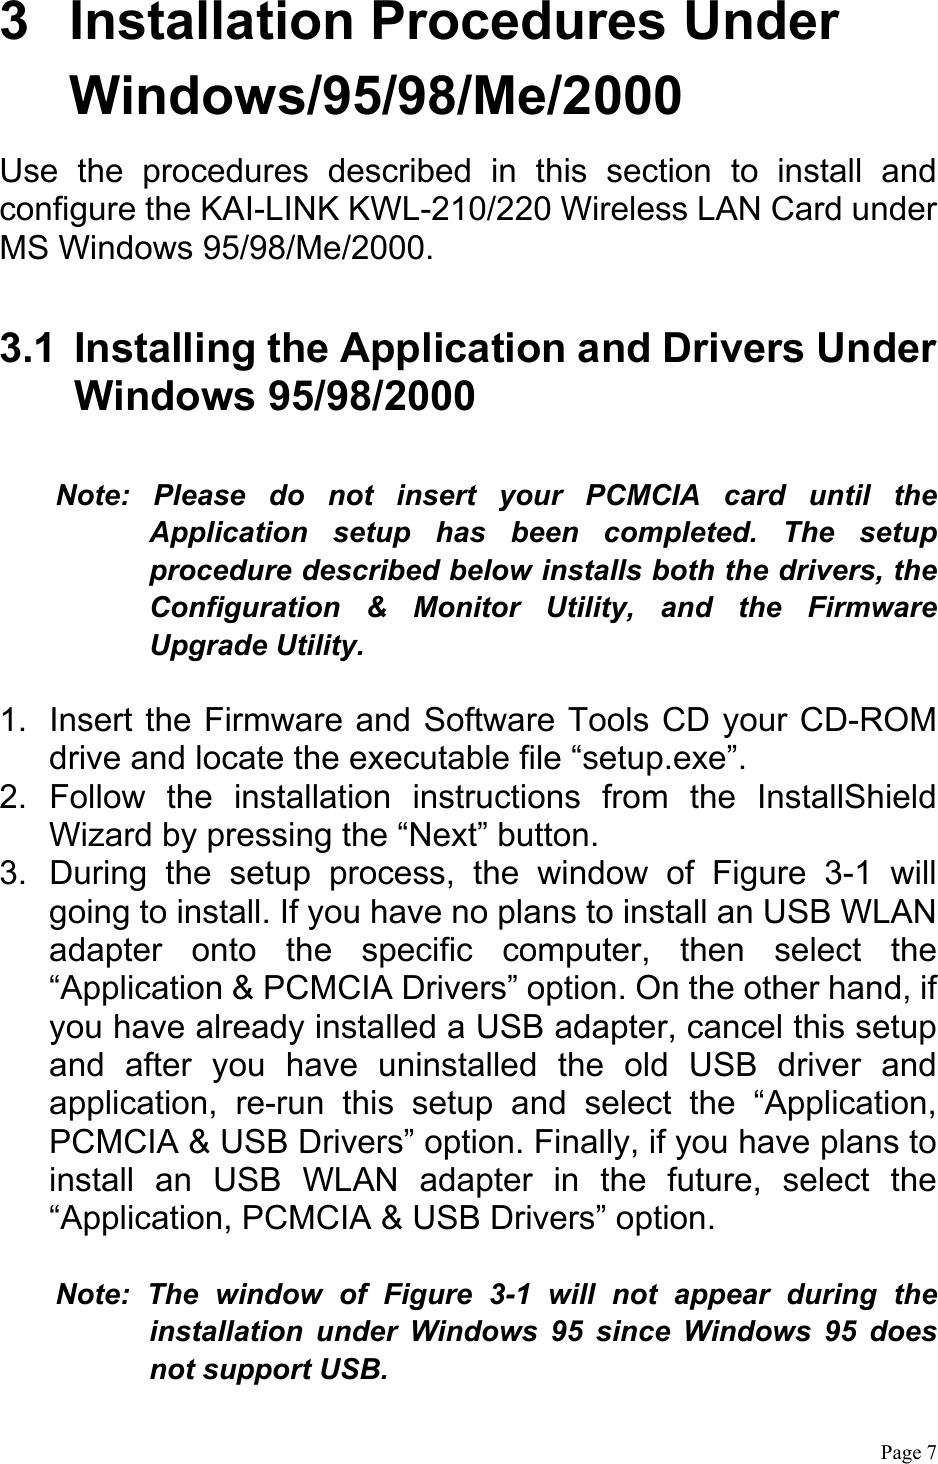  Page 7  3  Installation Procedures Under Windows/95/98/Me/2000 Use the procedures described in this section to install and configure the KAI-LINK KWL-210/220 Wireless LAN Card under MS Windows 95/98/Me/2000.  3.1  Installing the Application and Drivers Under Windows 95/98/2000  Note: Please do not insert your PCMCIA card until the Application setup has been completed. The setup procedure described below installs both the drivers, the Configuration &amp; Monitor Utility, and the Firmware Upgrade Utility.  1.  Insert the Firmware and Software Tools CD your CD-ROM drive and locate the executable file “setup.exe”. 2. Follow the installation instructions from the InstallShield Wizard by pressing the “Next” button. 3.  During the setup process, the window of Figure 3-1 will going to install. If you have no plans to install an USB WLAN adapter onto the specific computer, then select the “Application &amp; PCMCIA Drivers” option. On the other hand, if you have already installed a USB adapter, cancel this setup and after you have uninstalled the old USB driver and application, re-run this setup and select the “Application, PCMCIA &amp; USB Drivers” option. Finally, if you have plans to install an USB WLAN adapter in the future, select the “Application, PCMCIA &amp; USB Drivers” option.  Note: The window of Figure 3-1 will not appear during the installation under Windows 95 since Windows 95 does not support USB. 